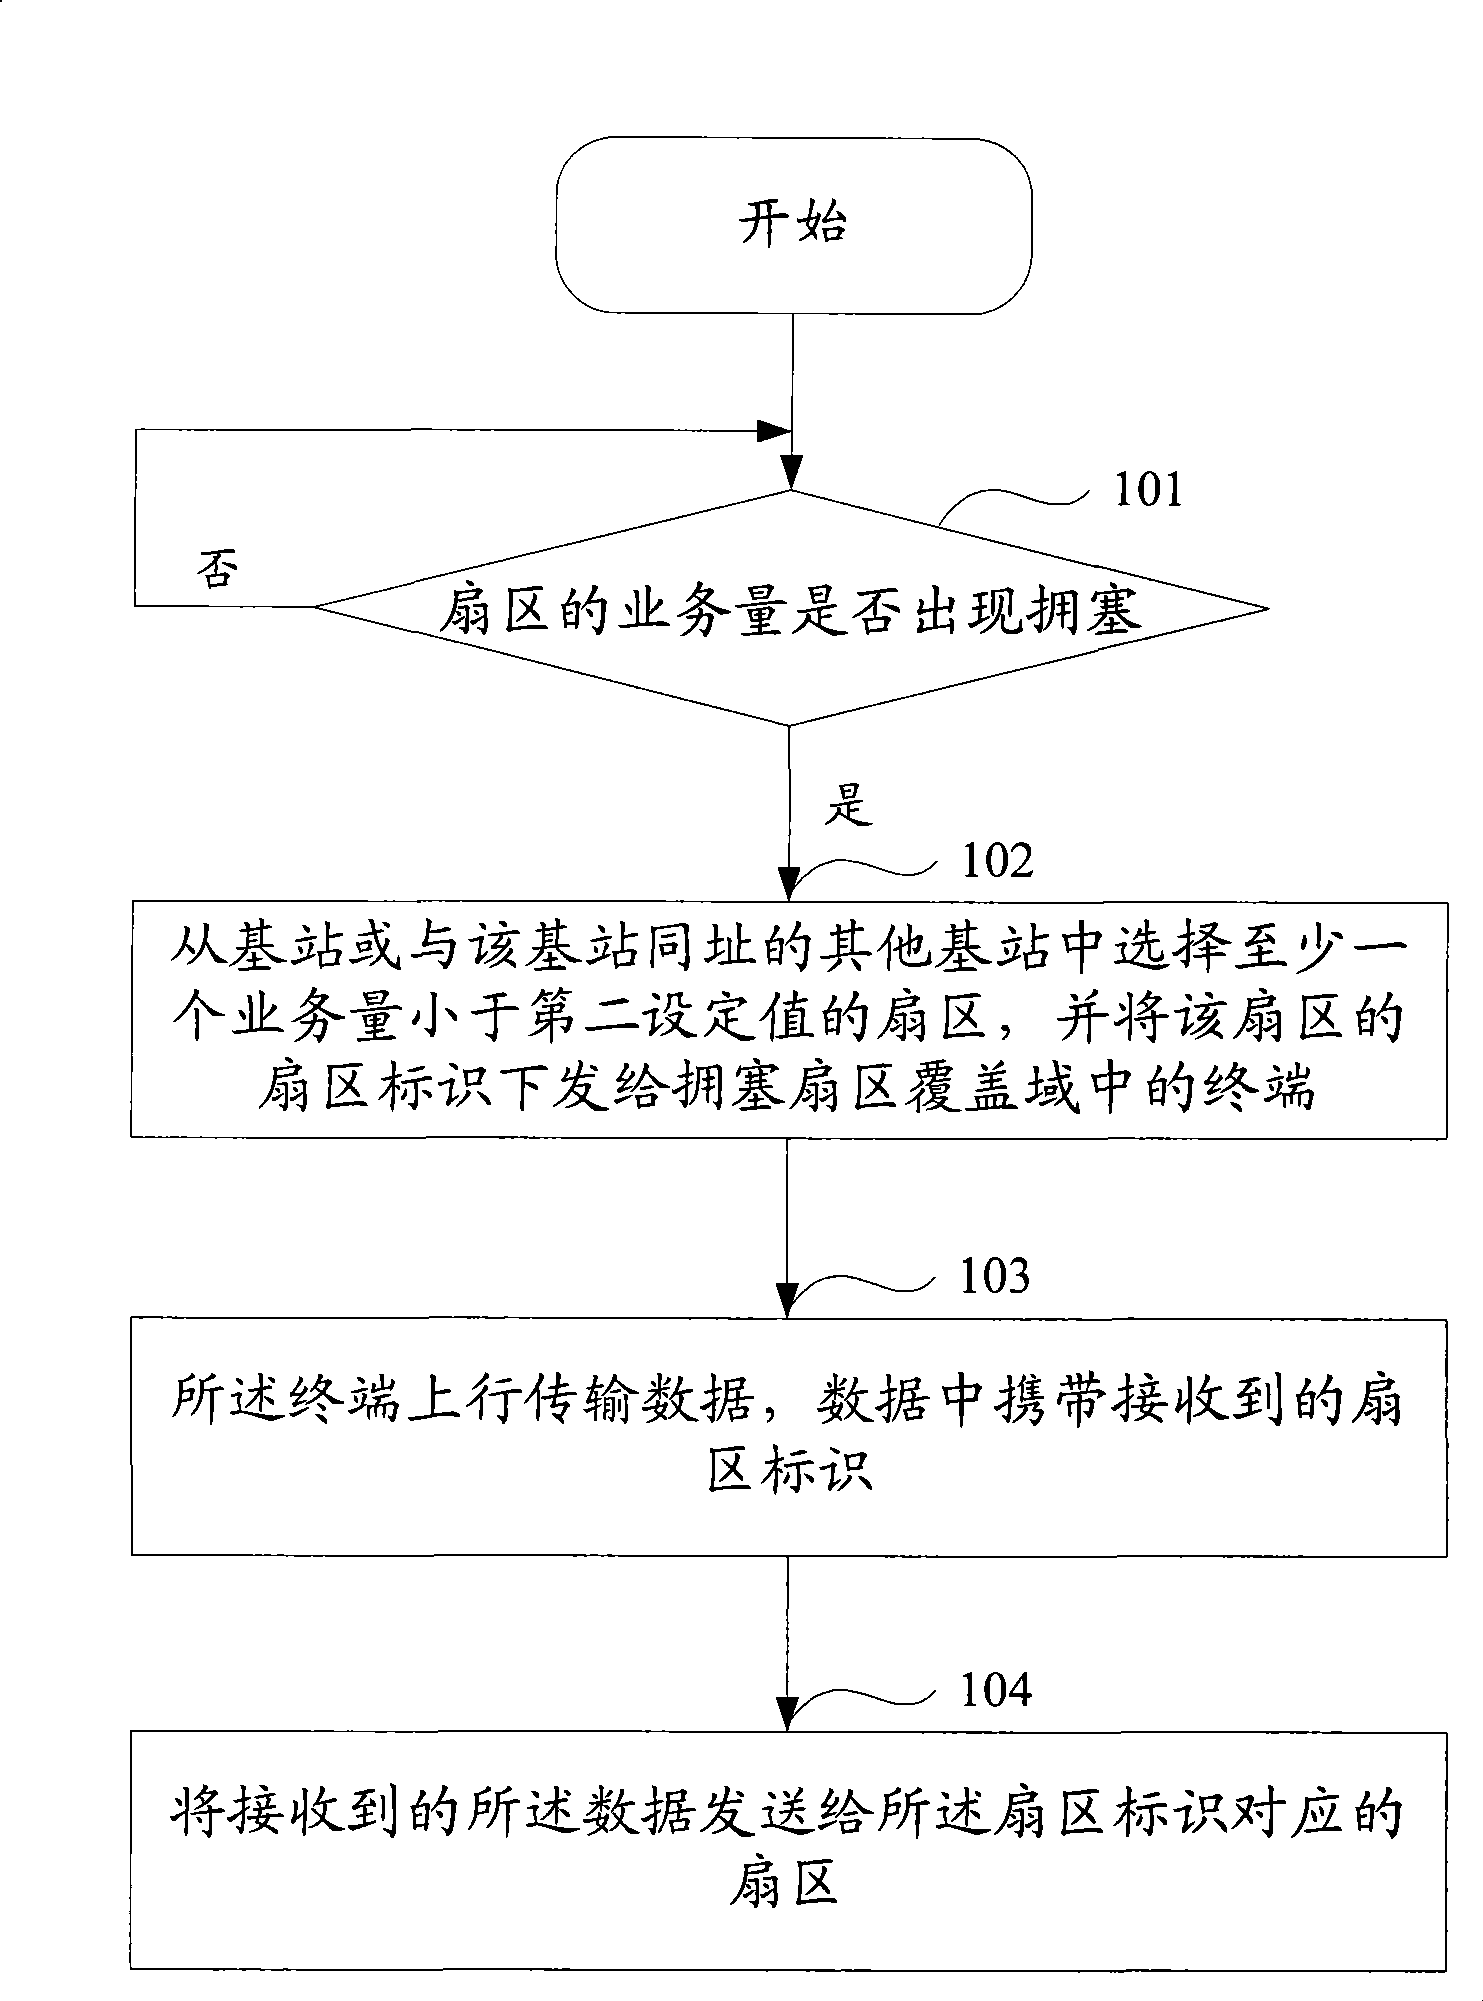 Method for enlarging local region wireless communication capacity, communication system and network subsystem